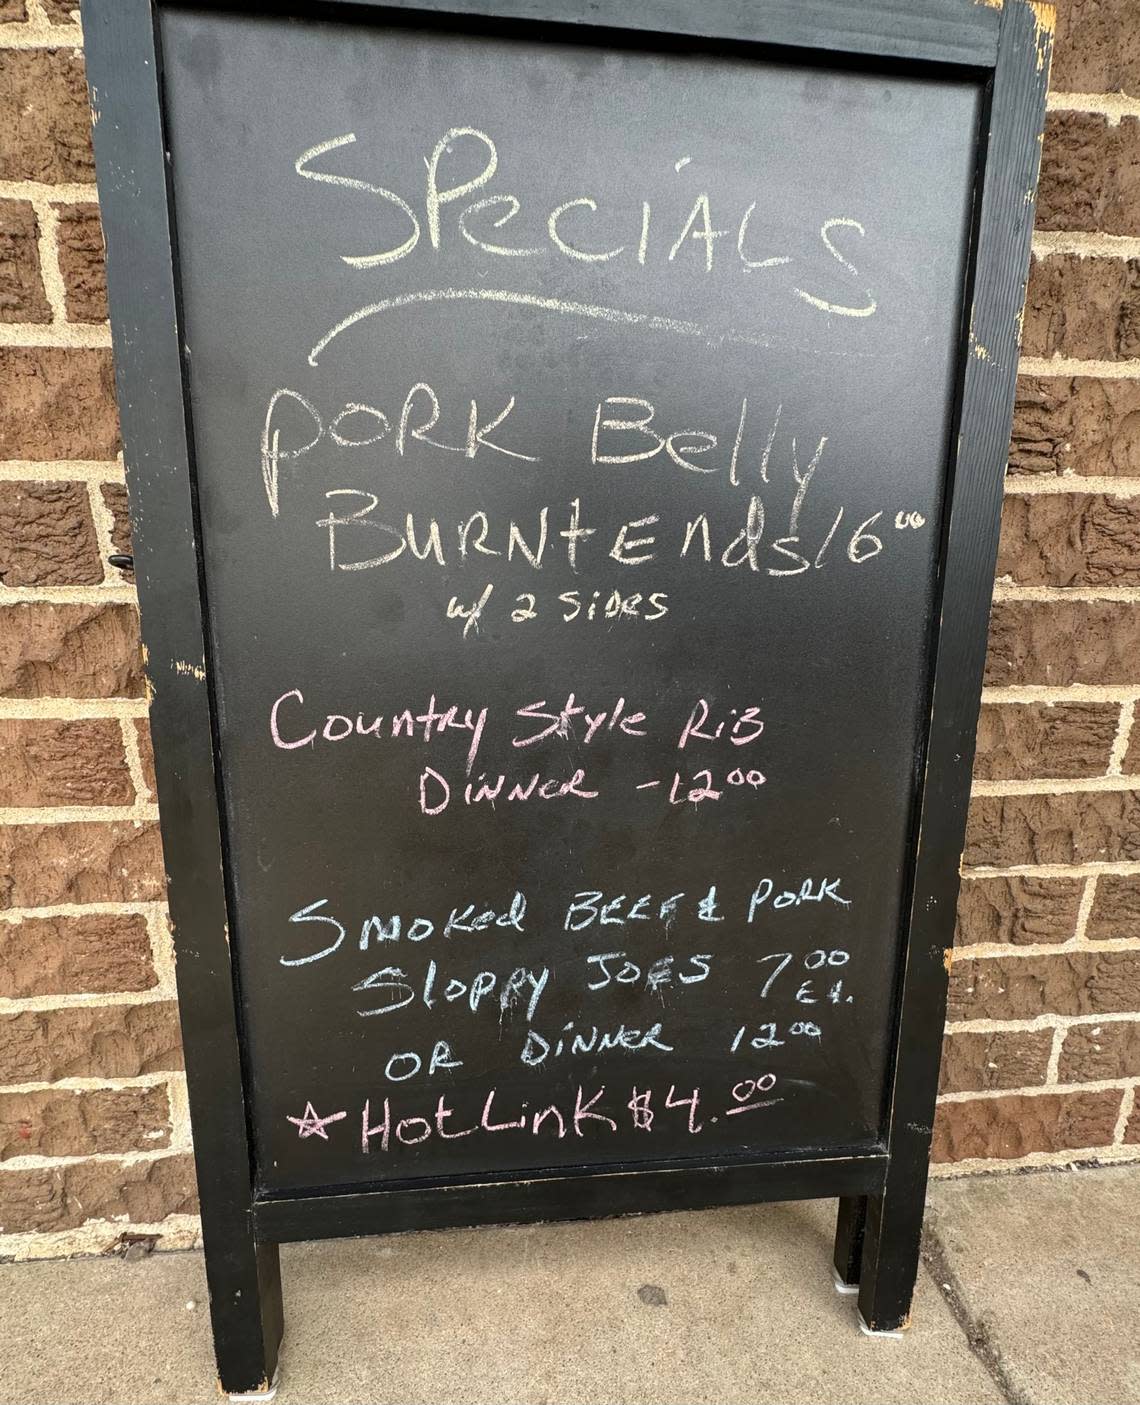 The specials board at Tanker BBQ on a recent Friday